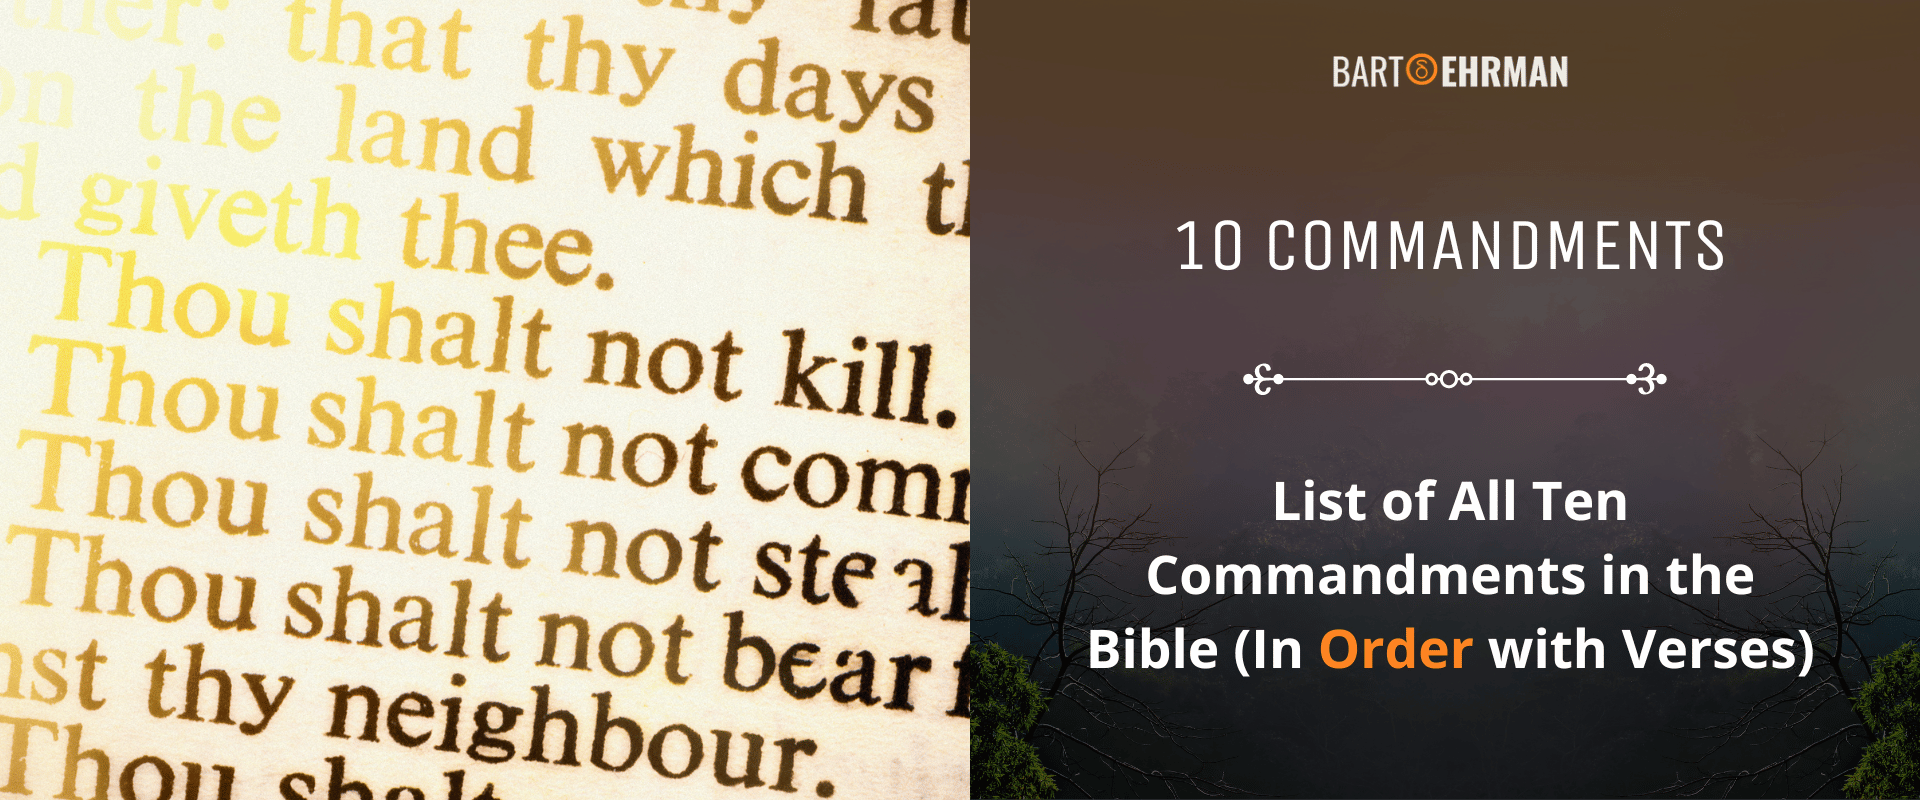 10 Commandments - List of All Ten Commandments in the Bible (In Order with Verses)